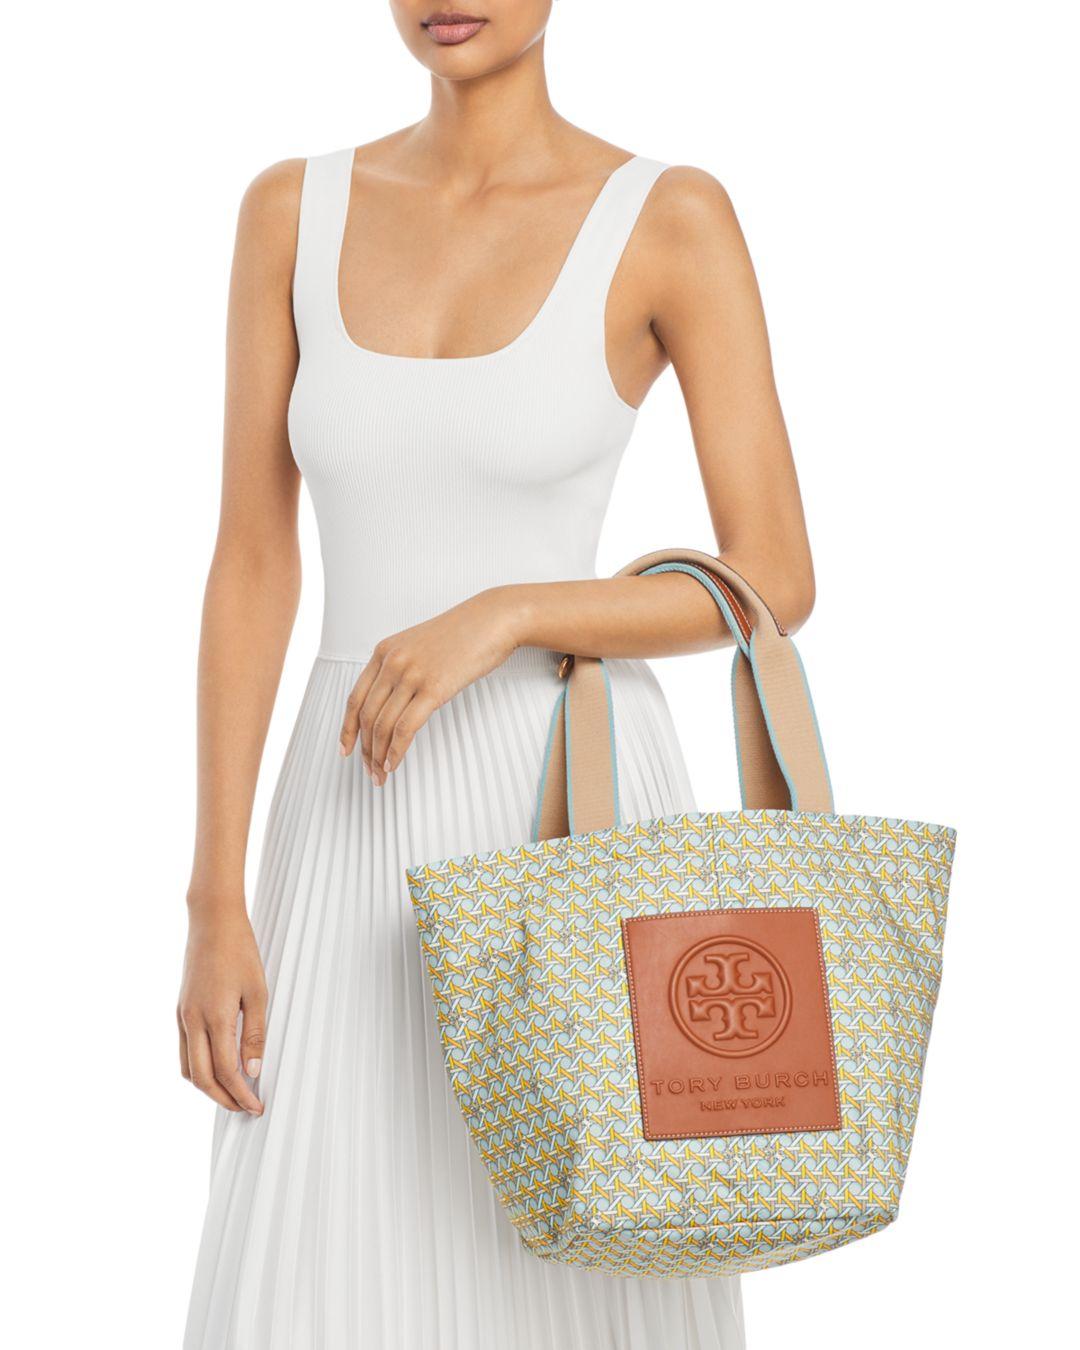 Tory Burch Printed Small Tote Bag | Lyst Canada